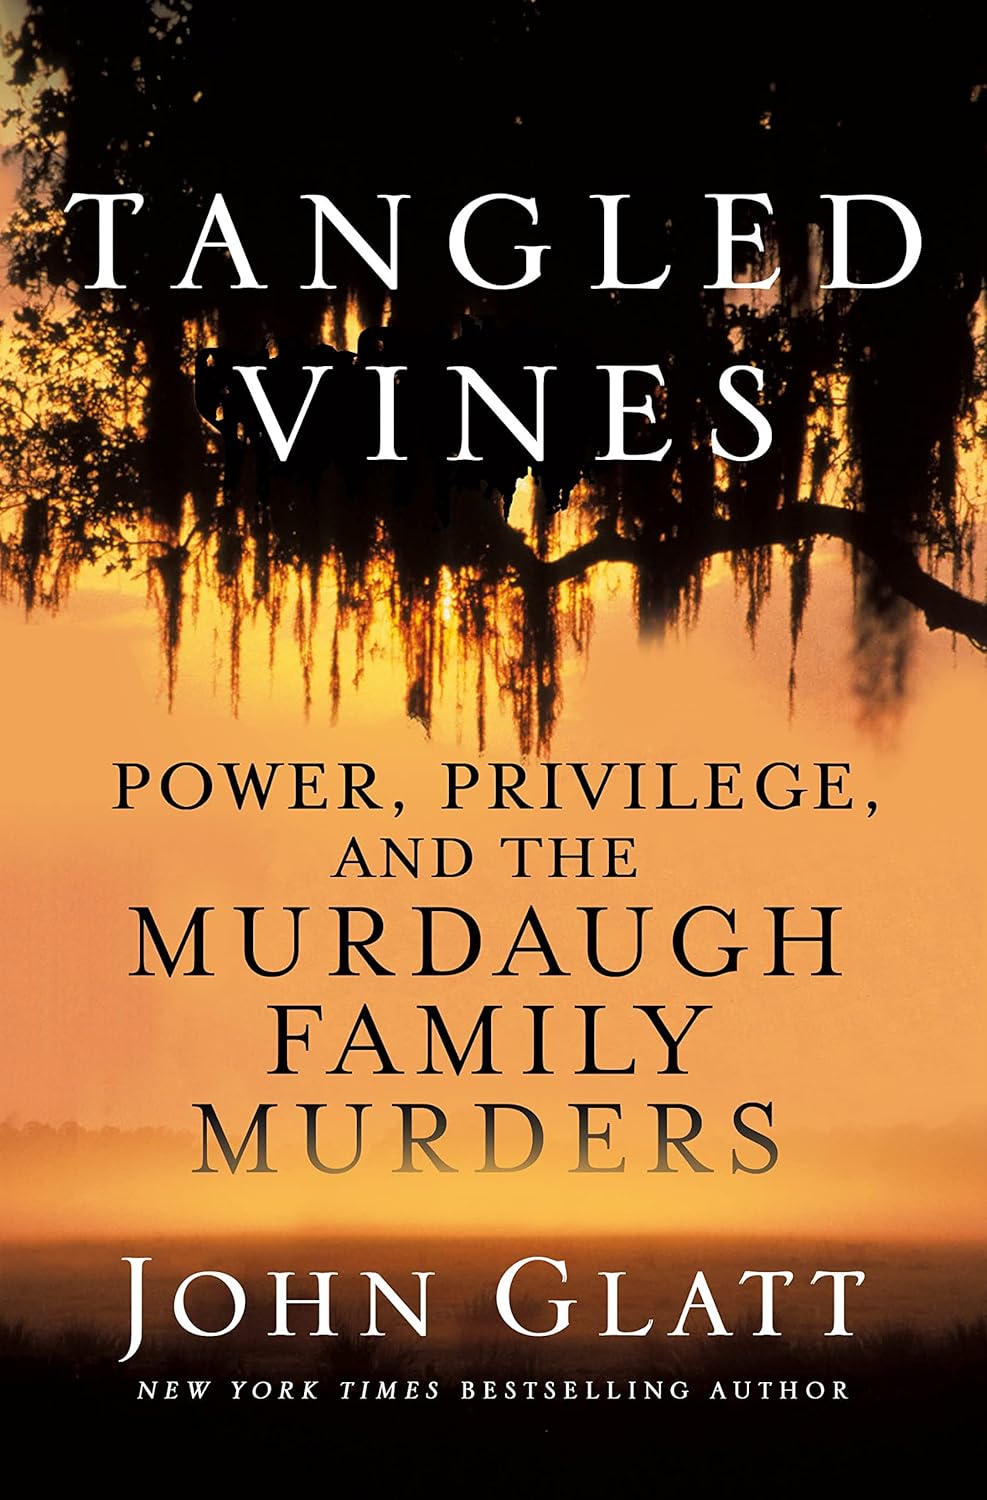 Image of "Tangled Vines".